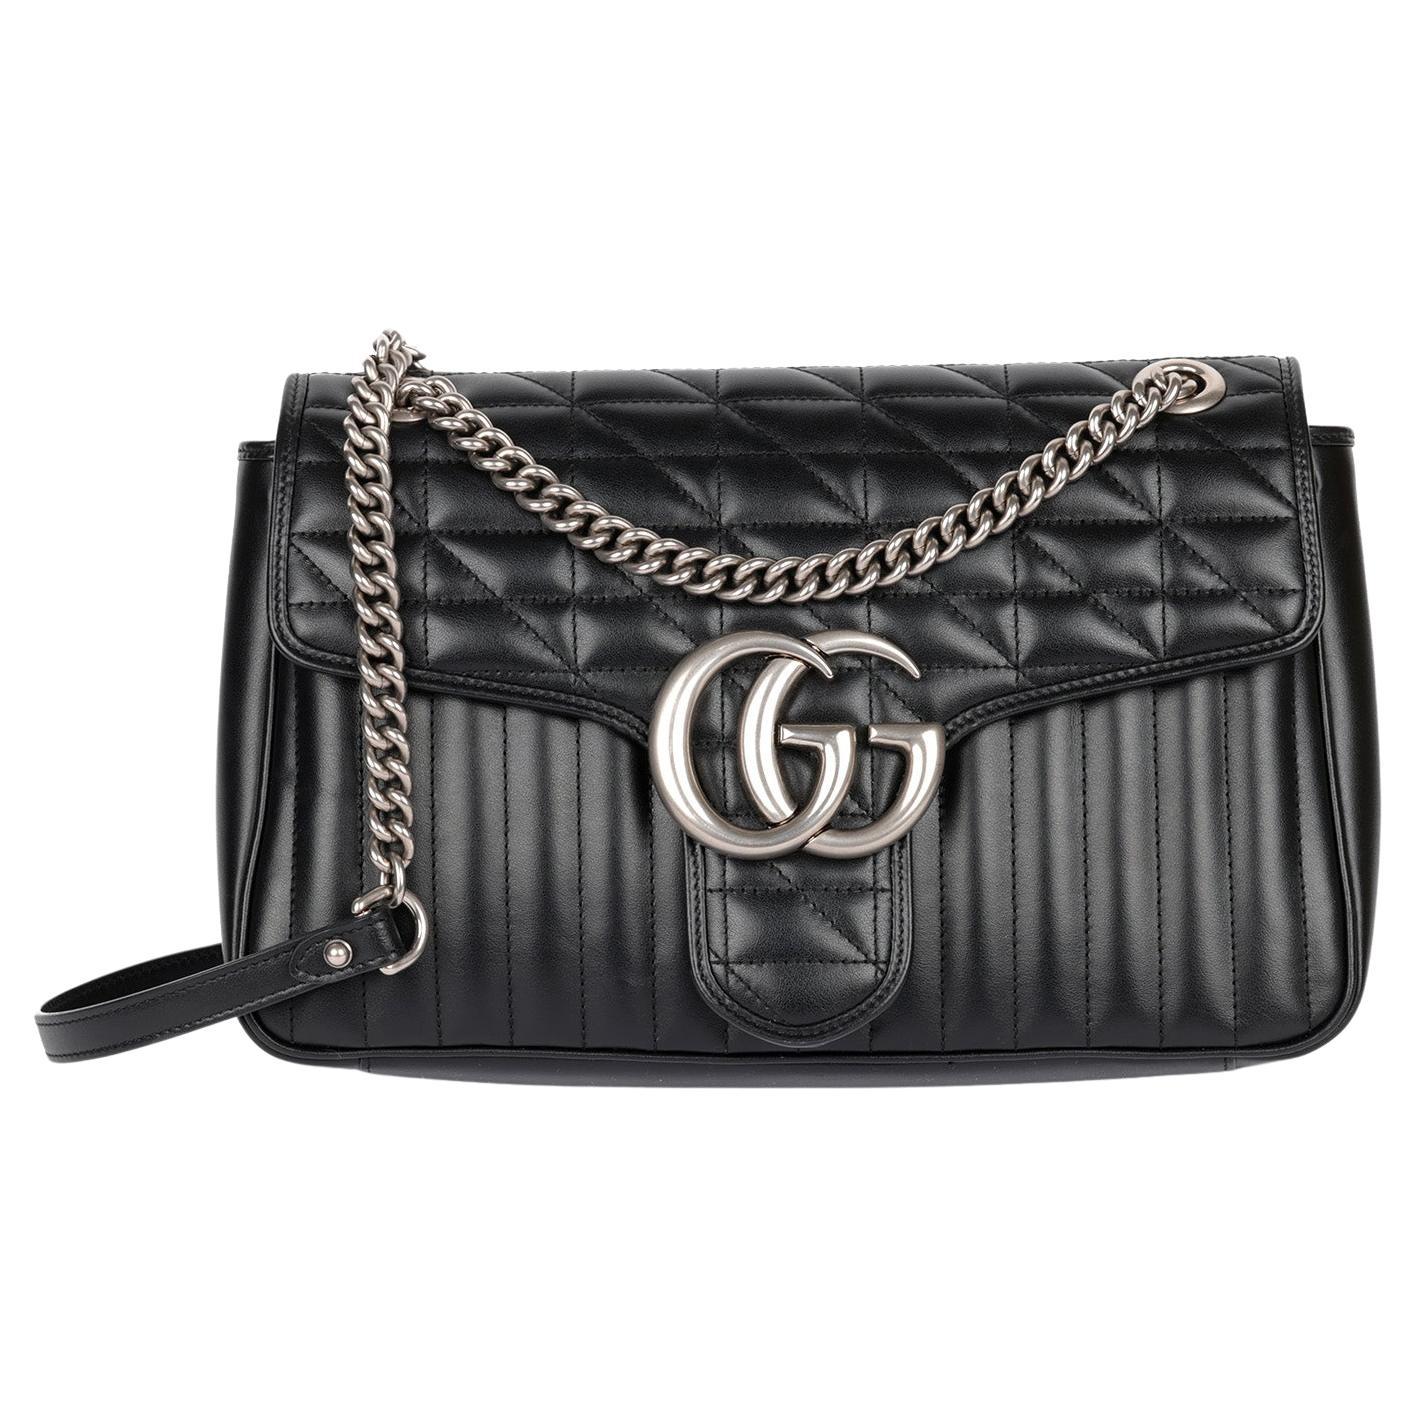 Gucci Black Quilted Calfskin Leather Medium GG Marmont For Sale